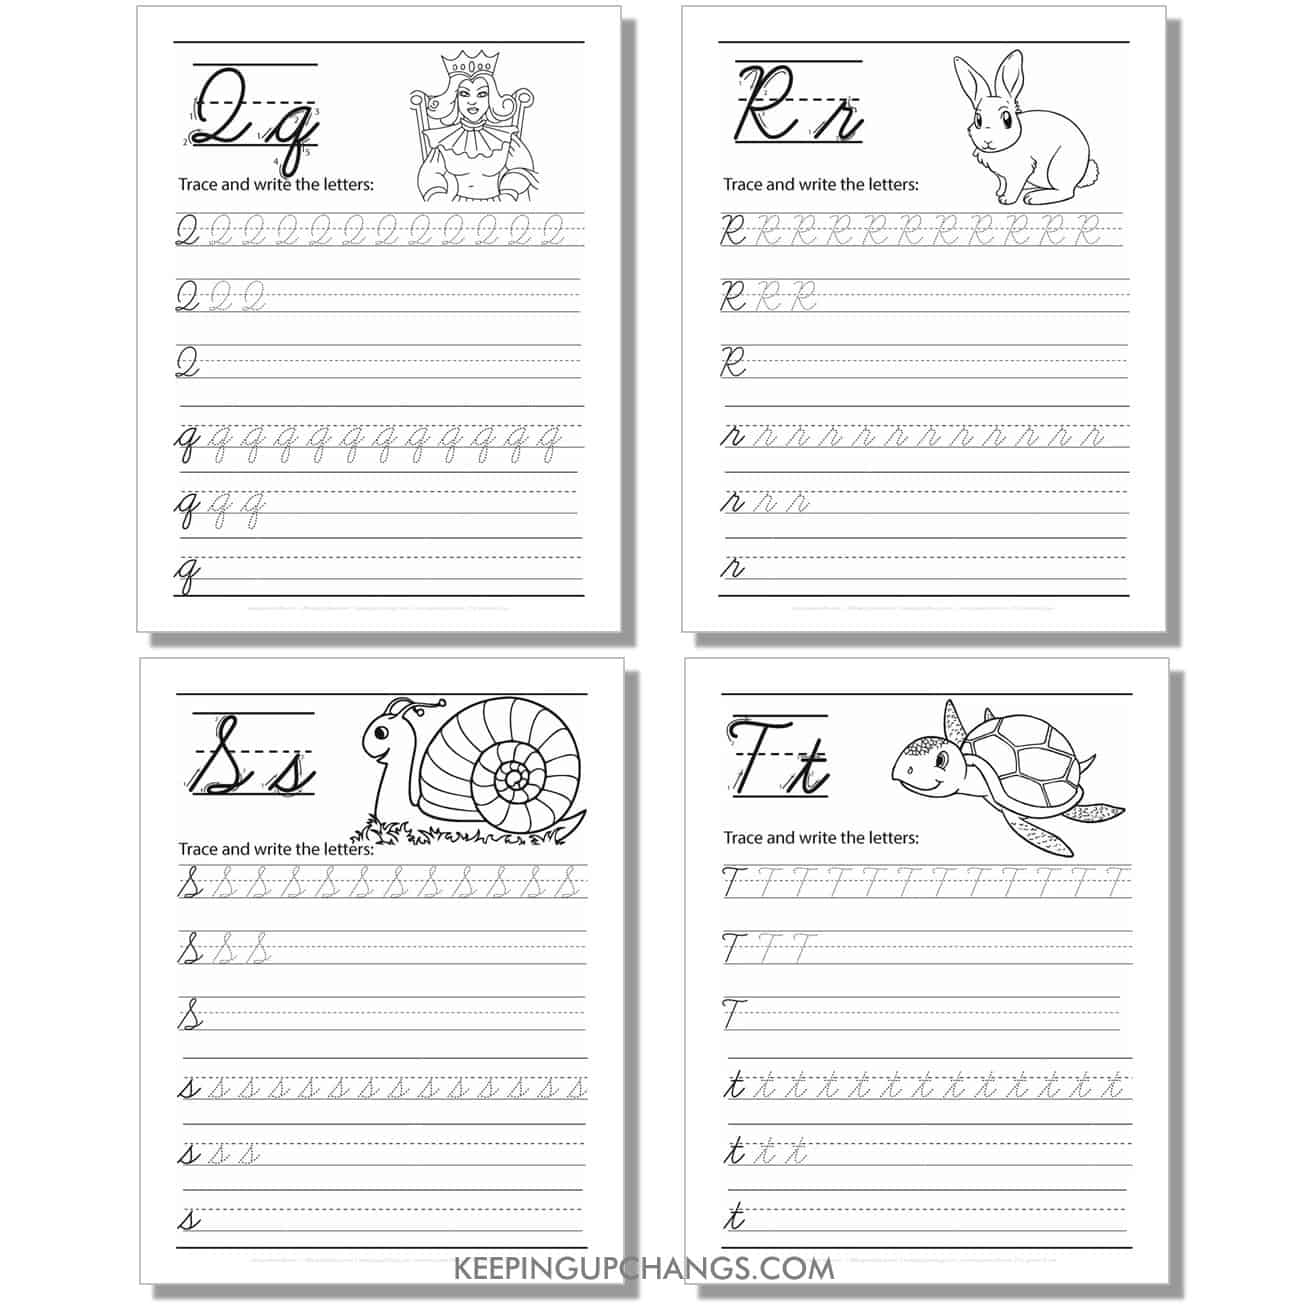 cursive worksheet with uppercase, lowercase letters for q, r, s, t.